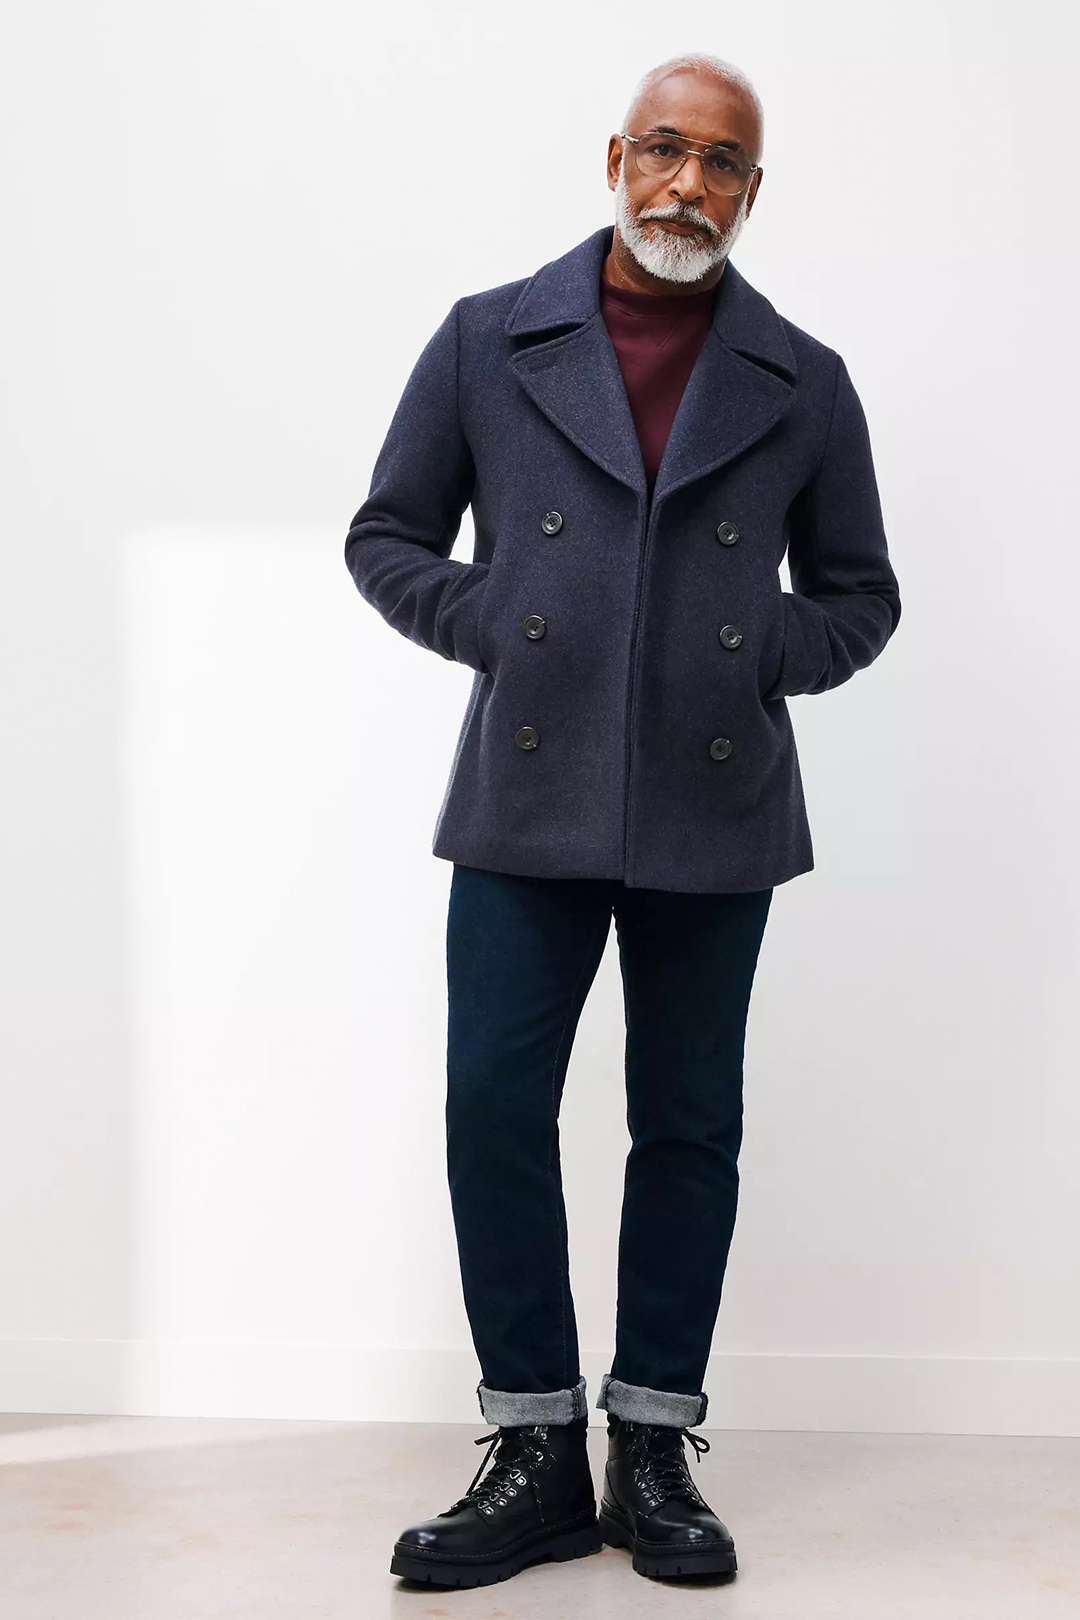 Navy pea coat, burgundy crew neck sweater, navy denim jeans, and black casual boots outfit